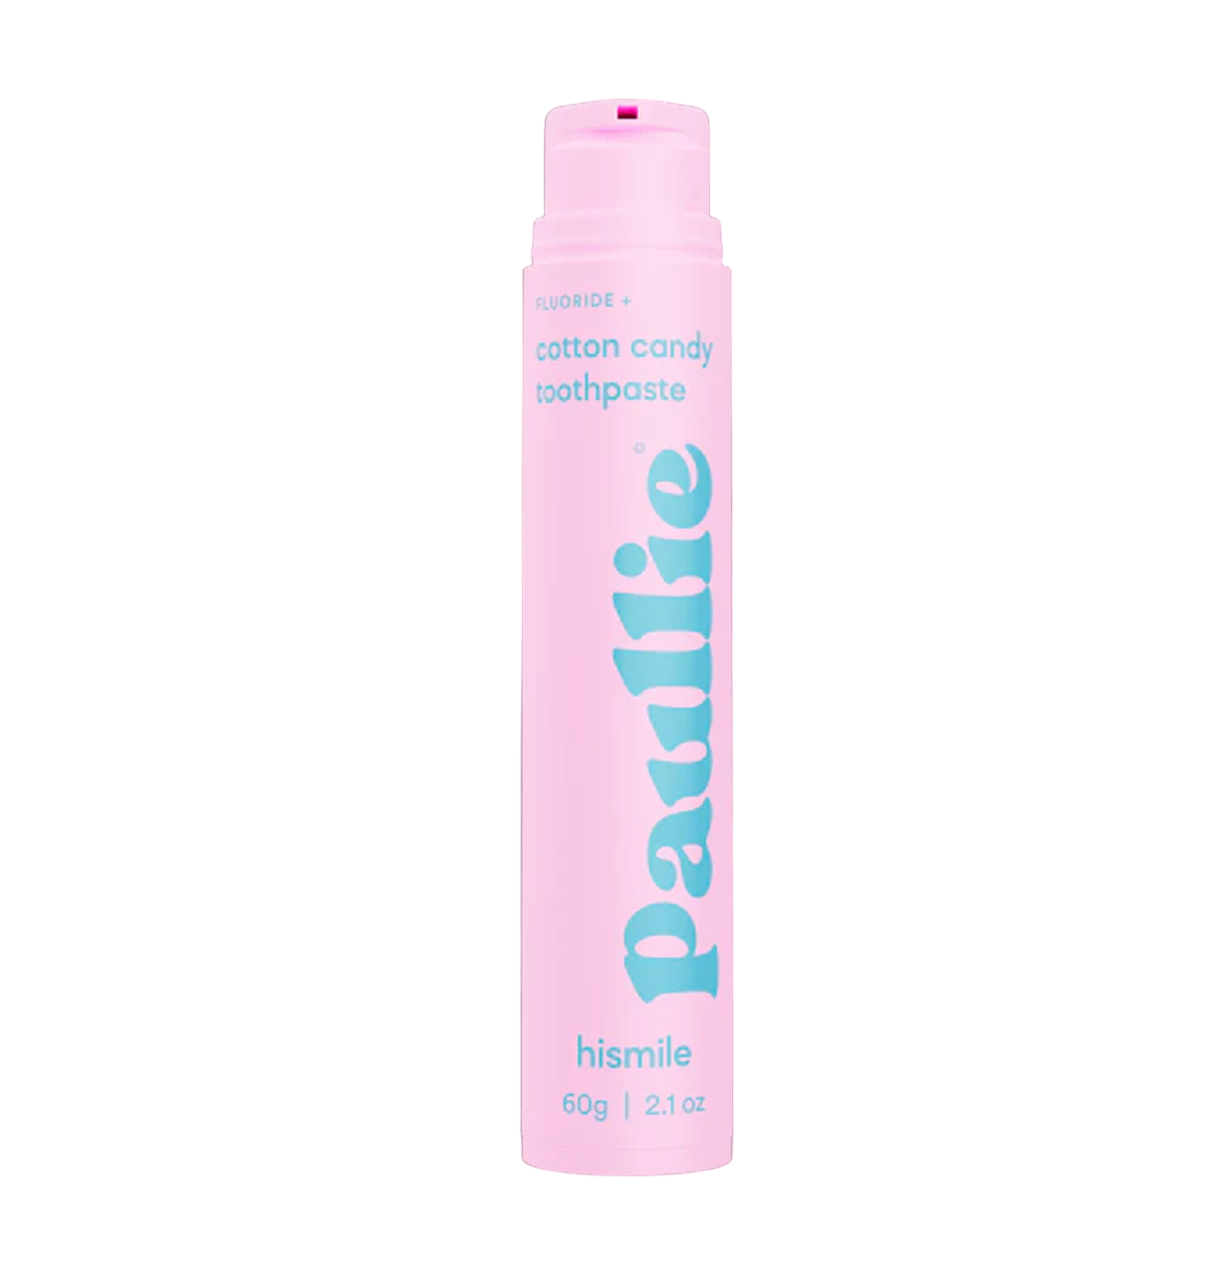 hismile Cotton Candy Toothpaste 60g